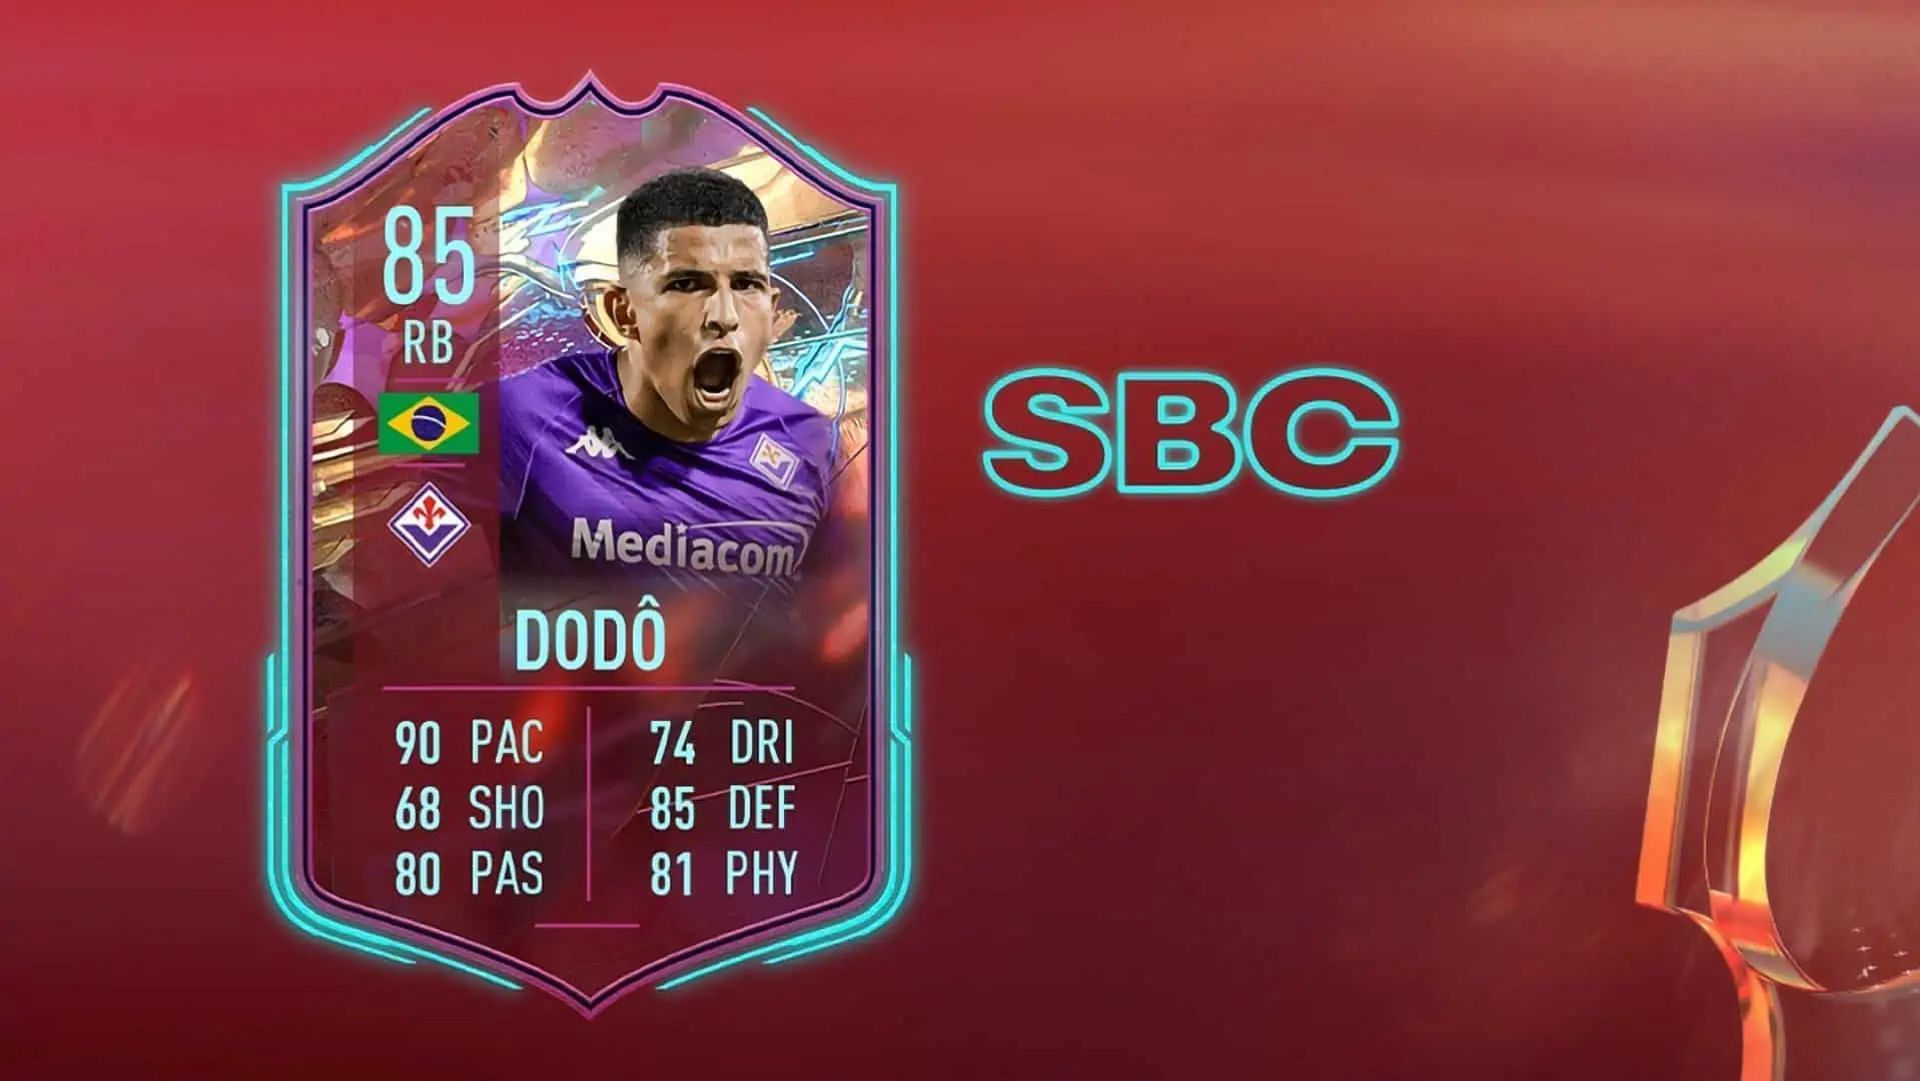 FIFA 23 Dodo Rulebreakers SBC: How to complete, estimated costs, and more